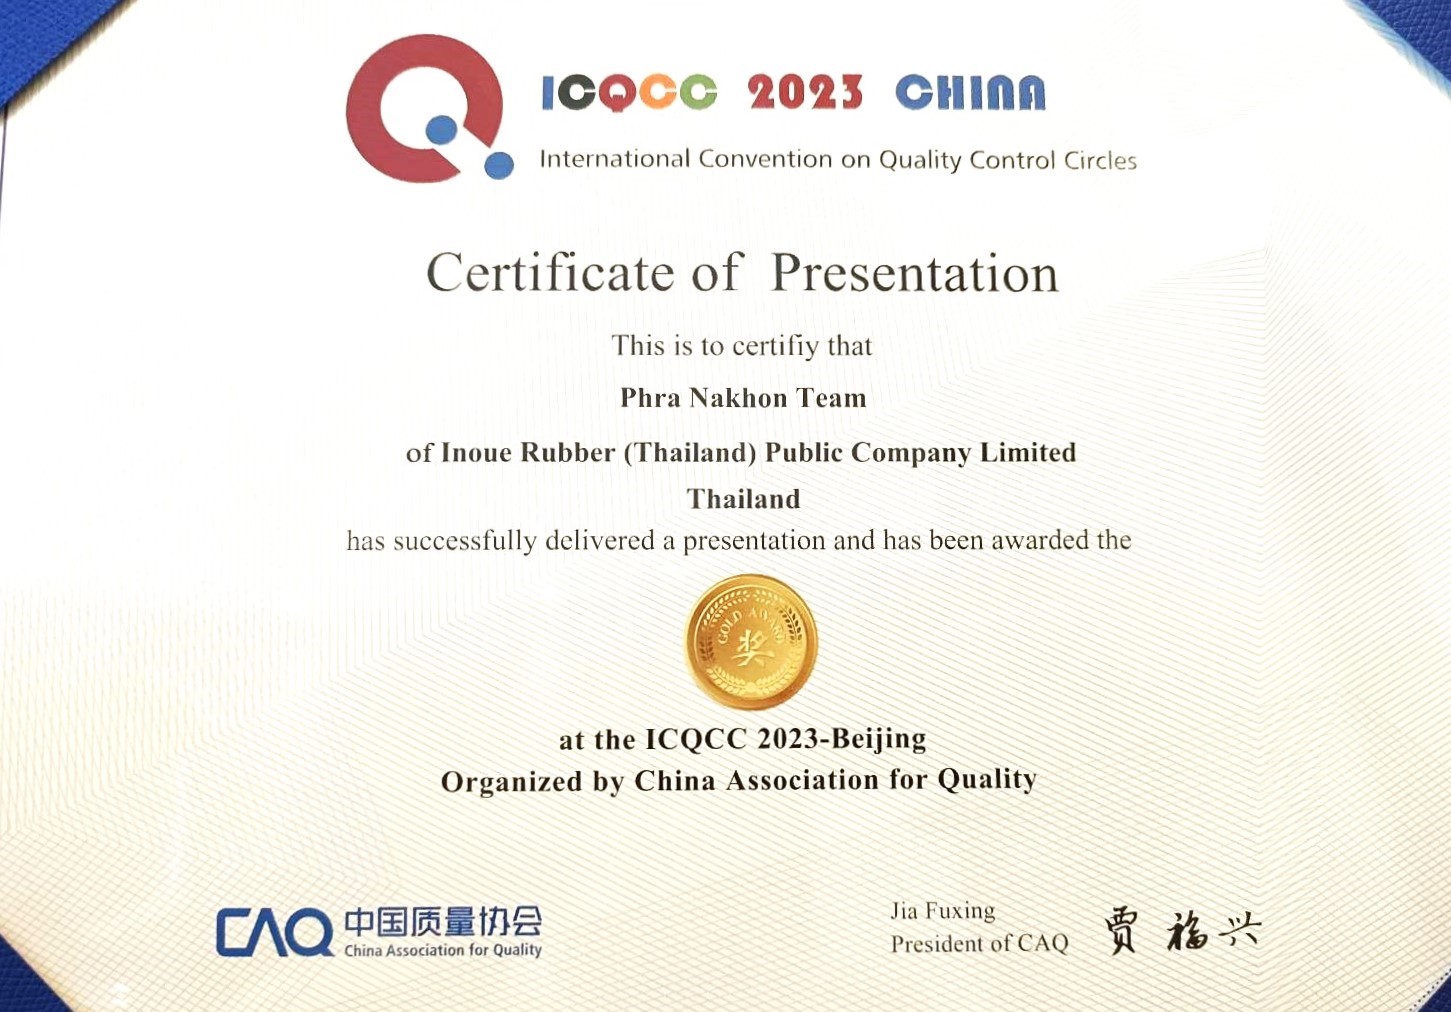 IRC won "Gold Level Award" from QCC presentation at International Convention on Quality Control Circles (ICQCC) No. 48 at Beijing, China